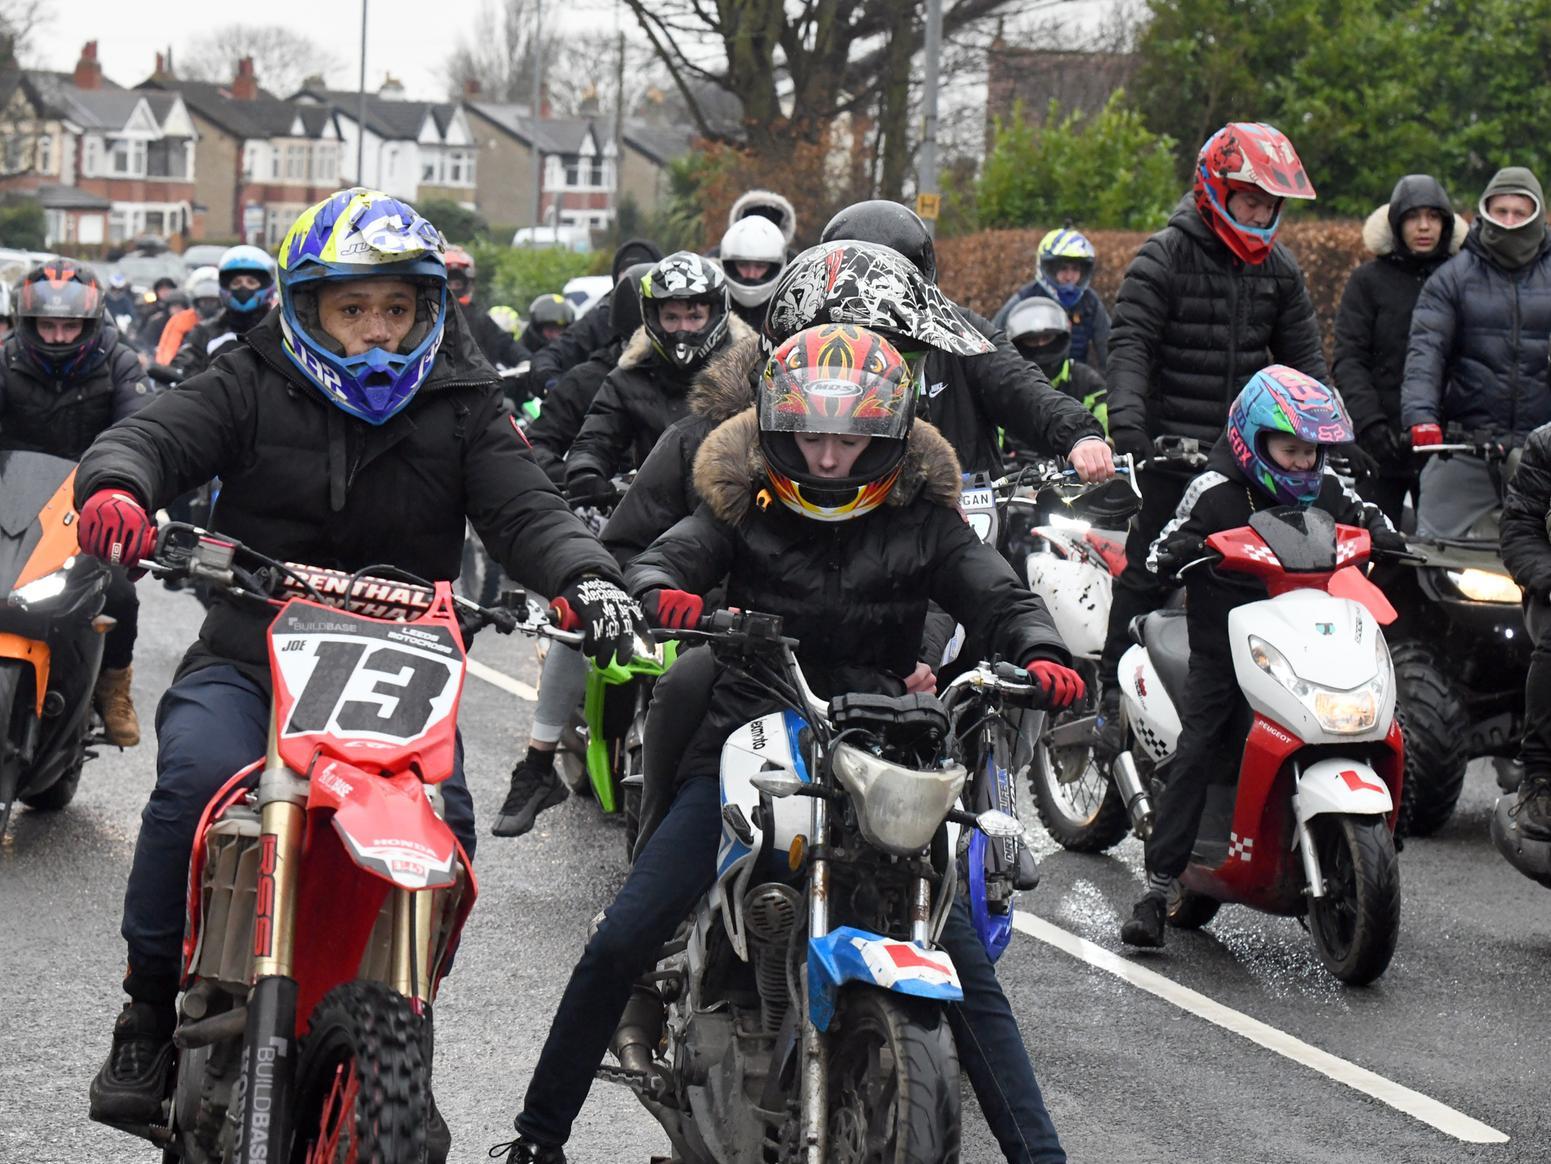 The funeral procession was filled with motorbikes.